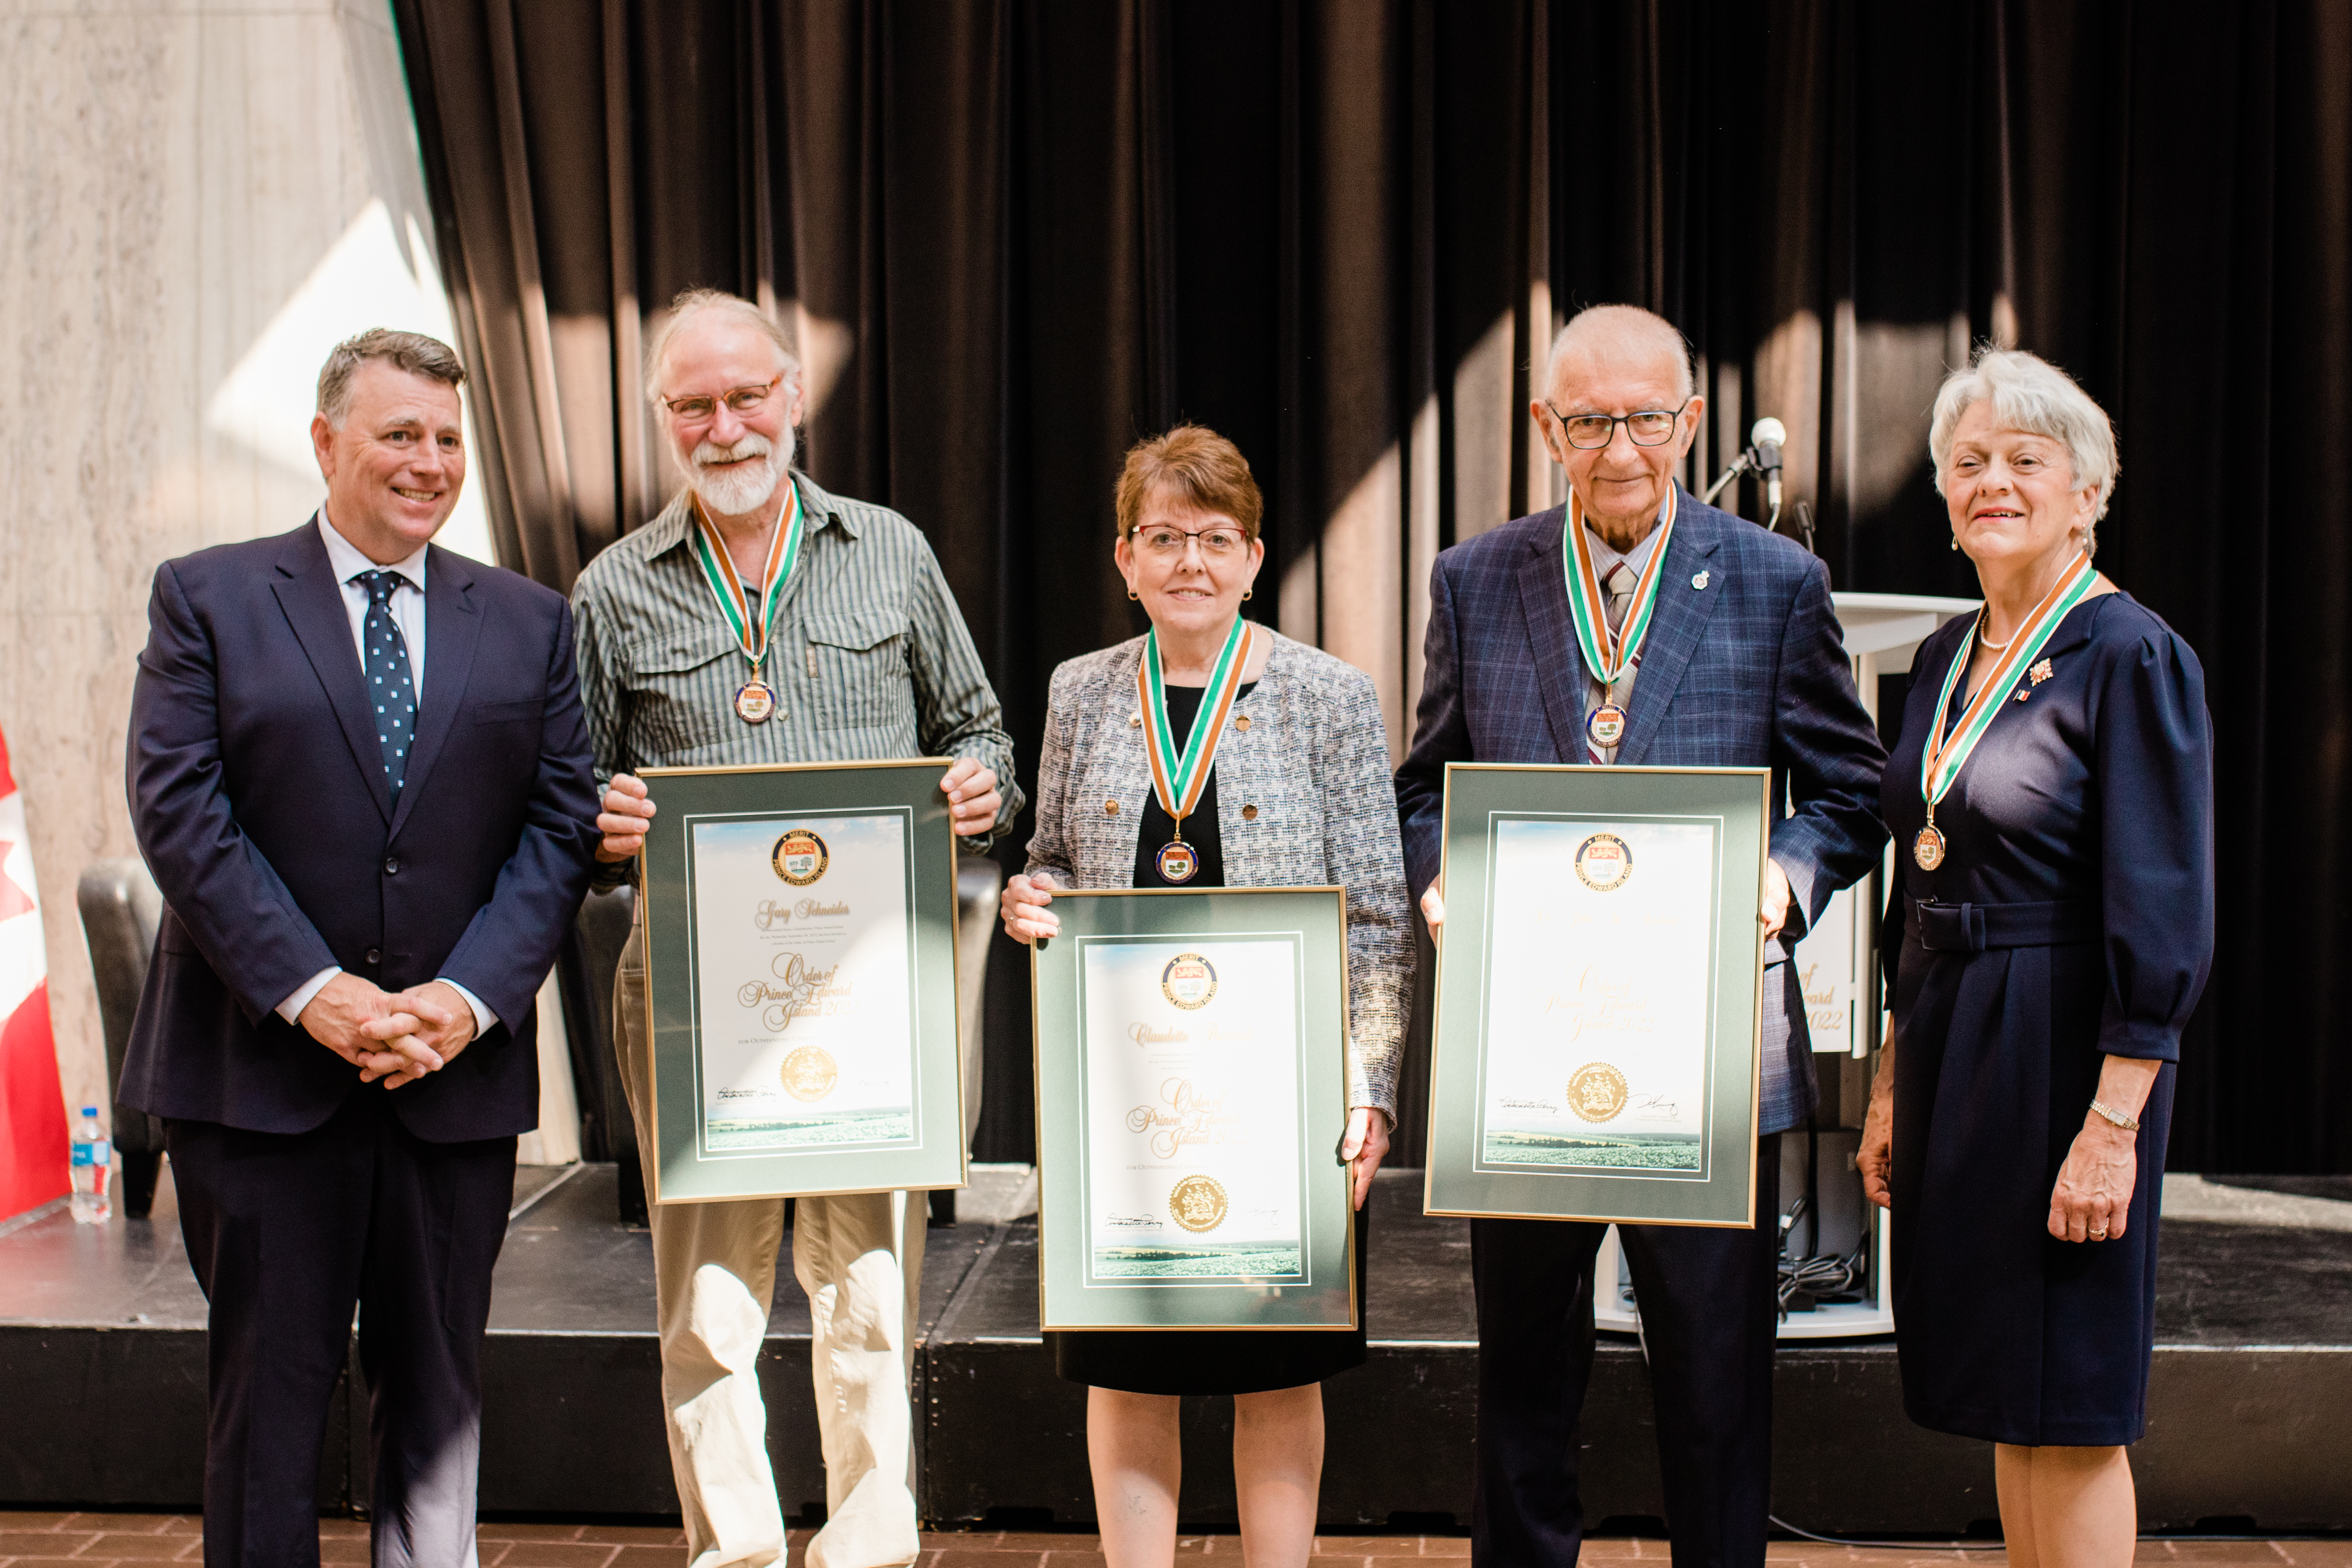 A photo of Premier Dennis King and Lieutenant Governor Antoinette Perry with the 2022 Medal of Merit recipients, Gary Schneider, Claudette Thériault, and Dr. John Andrew